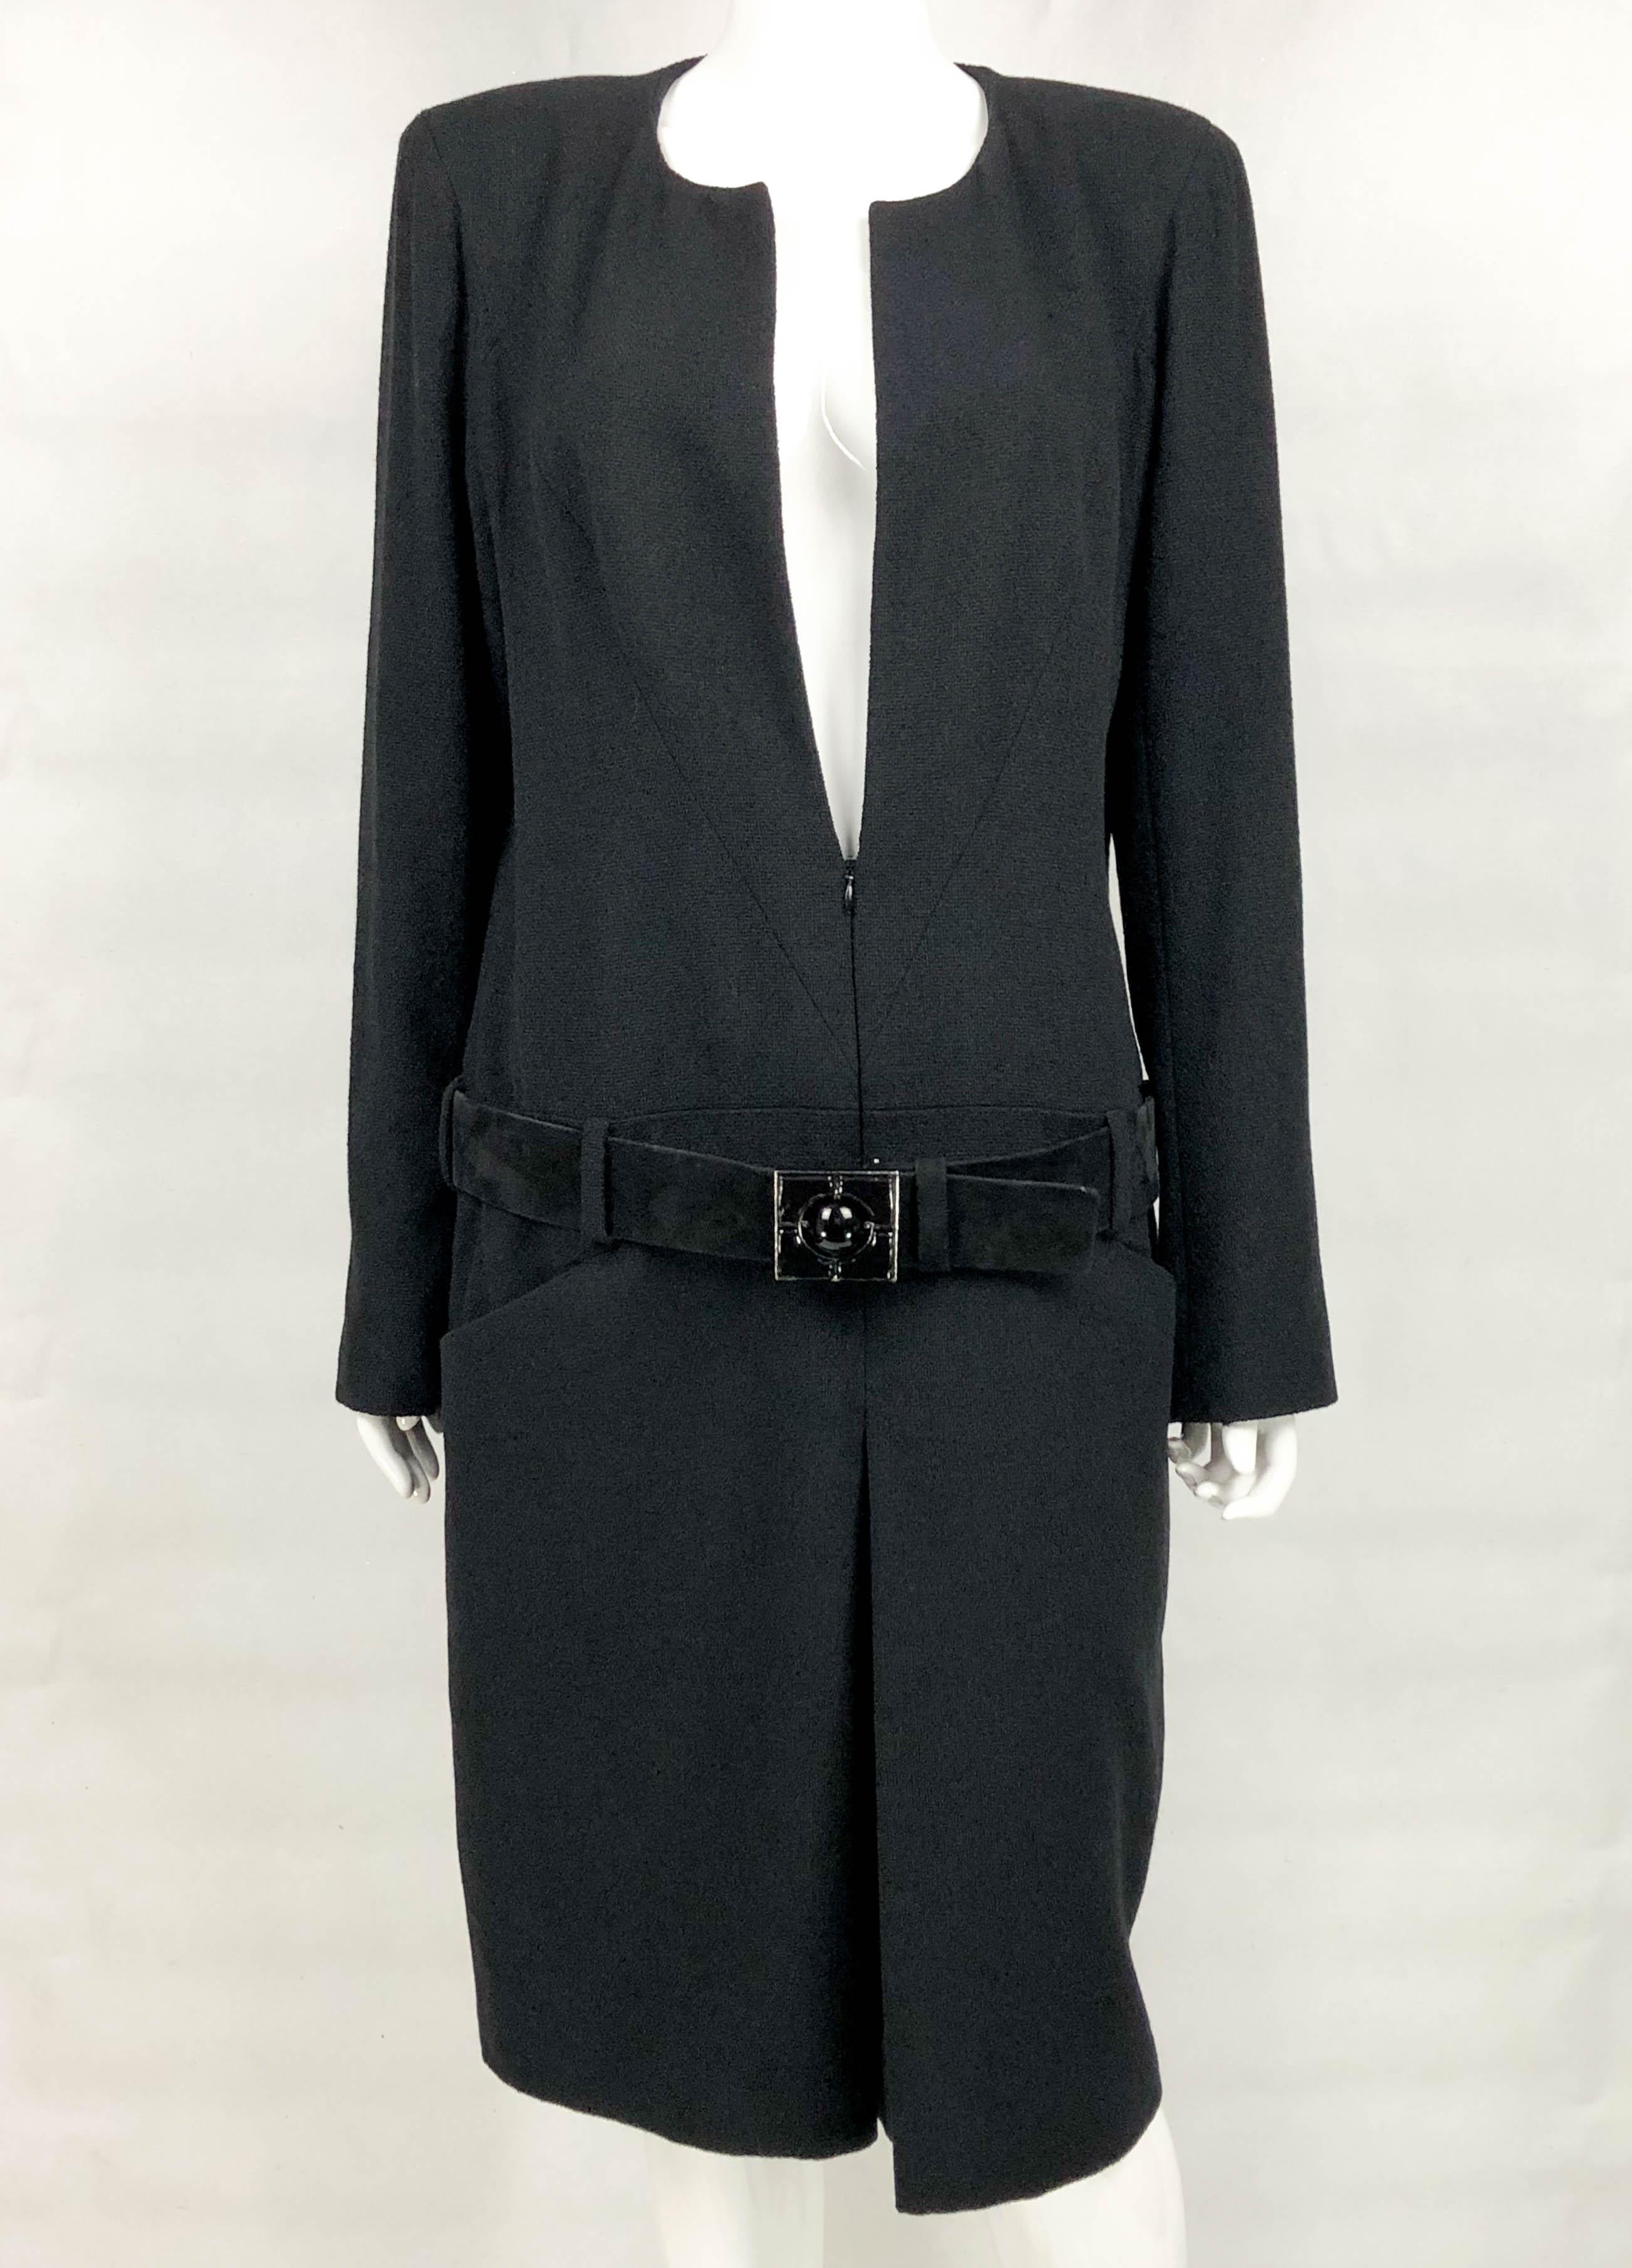 2009 Chanel Runway Look Black Wool Belted Dress / Coat (Large Size) For Sale 1